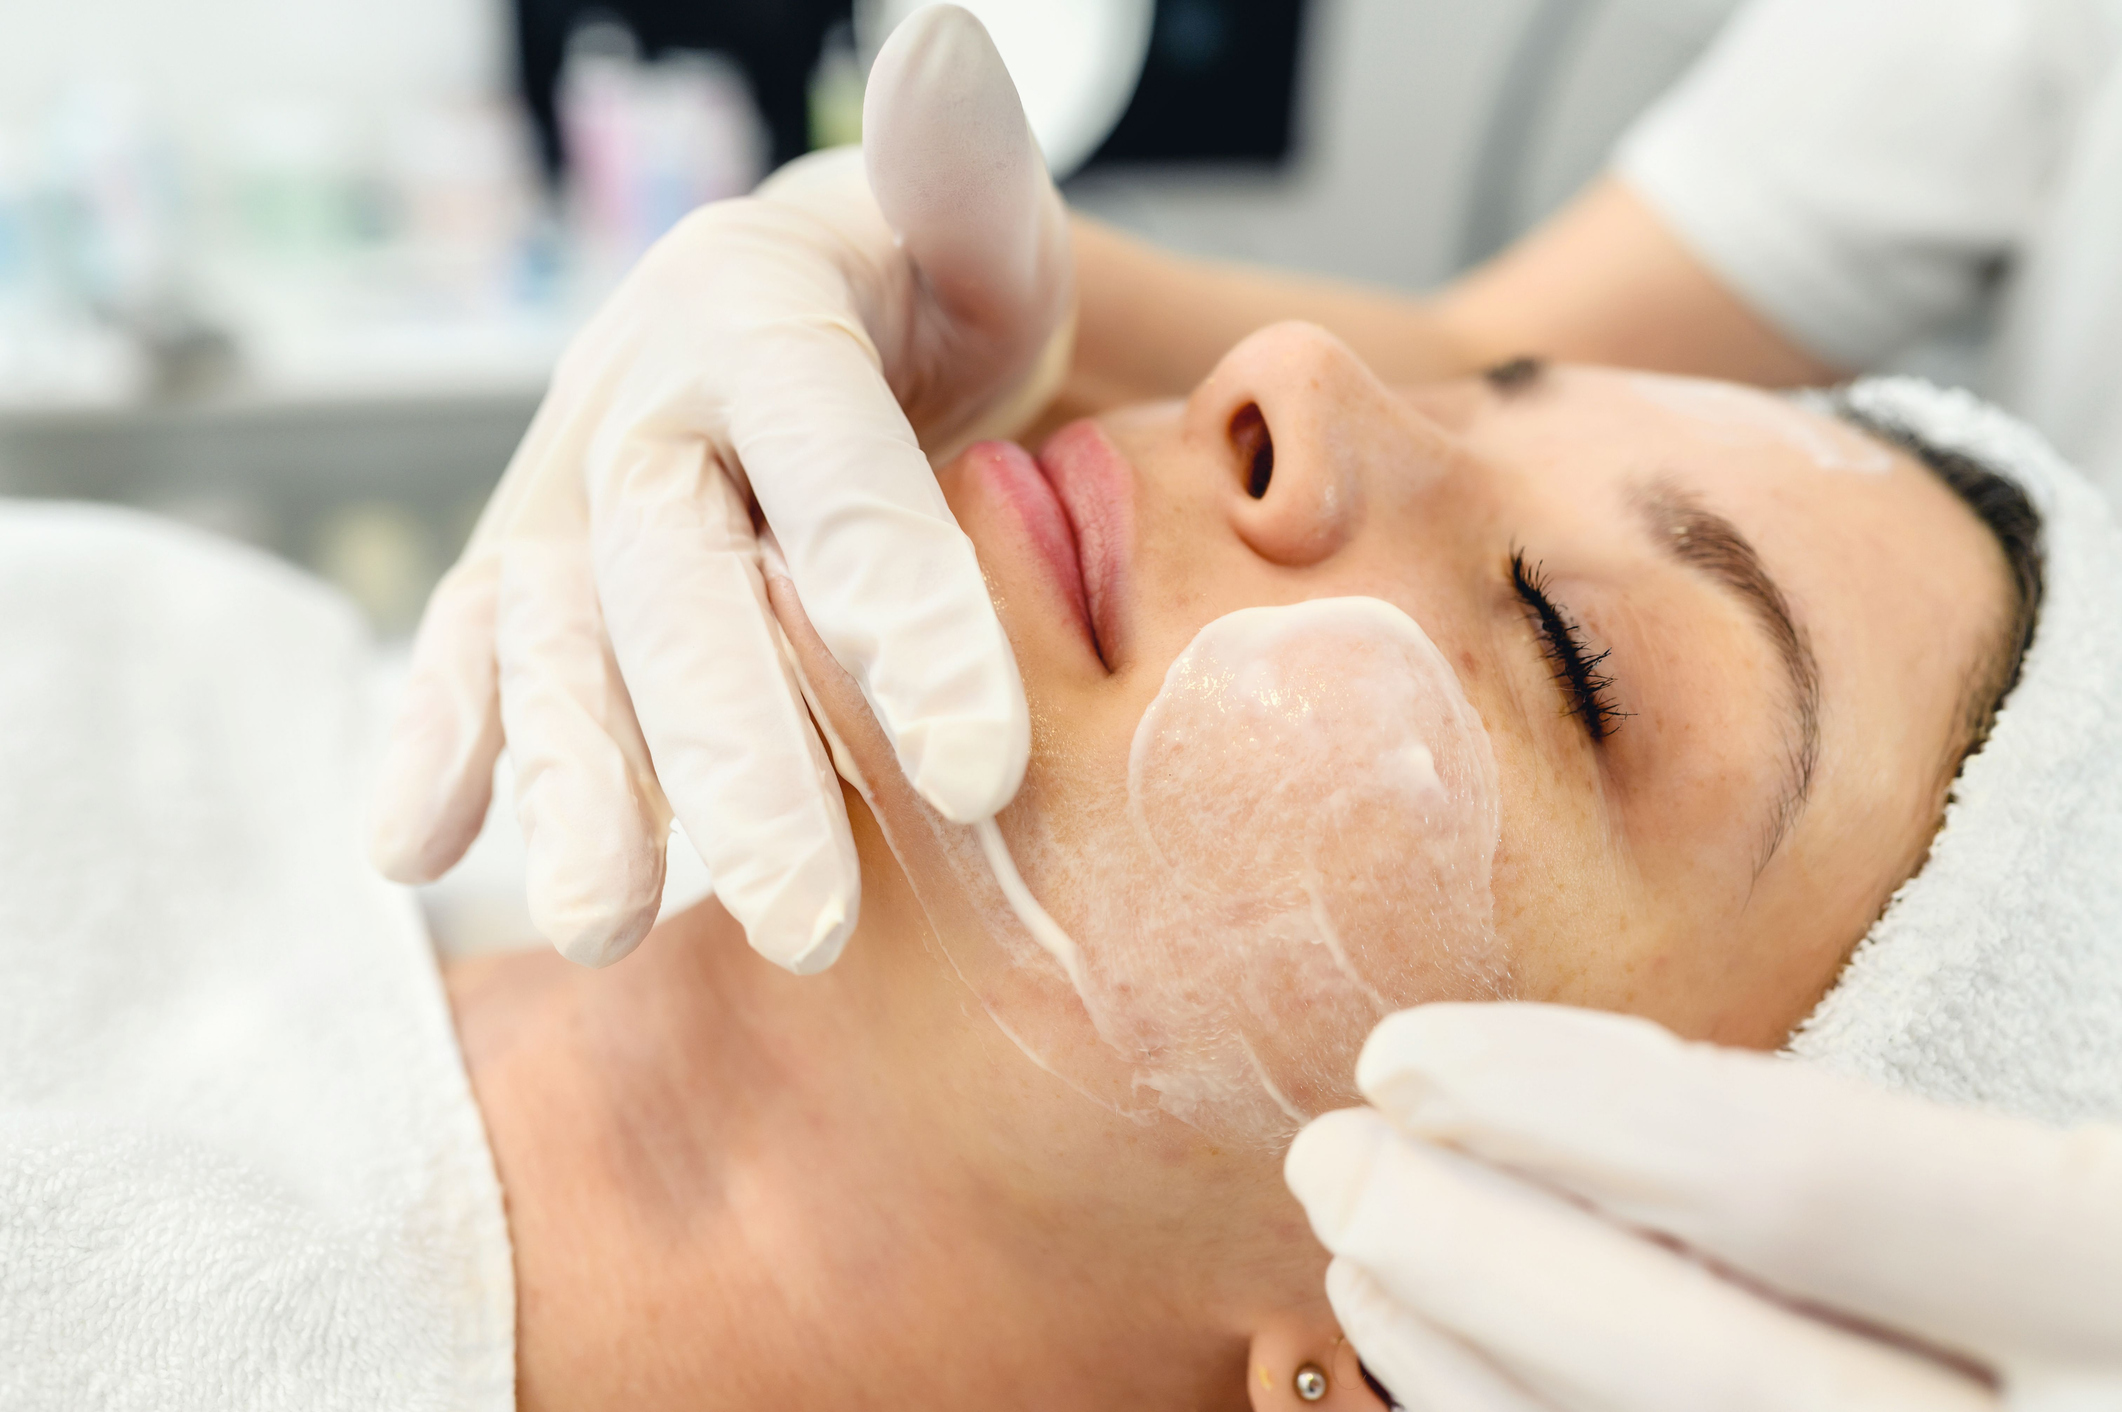 Woman on table receiving a chemical peel on face